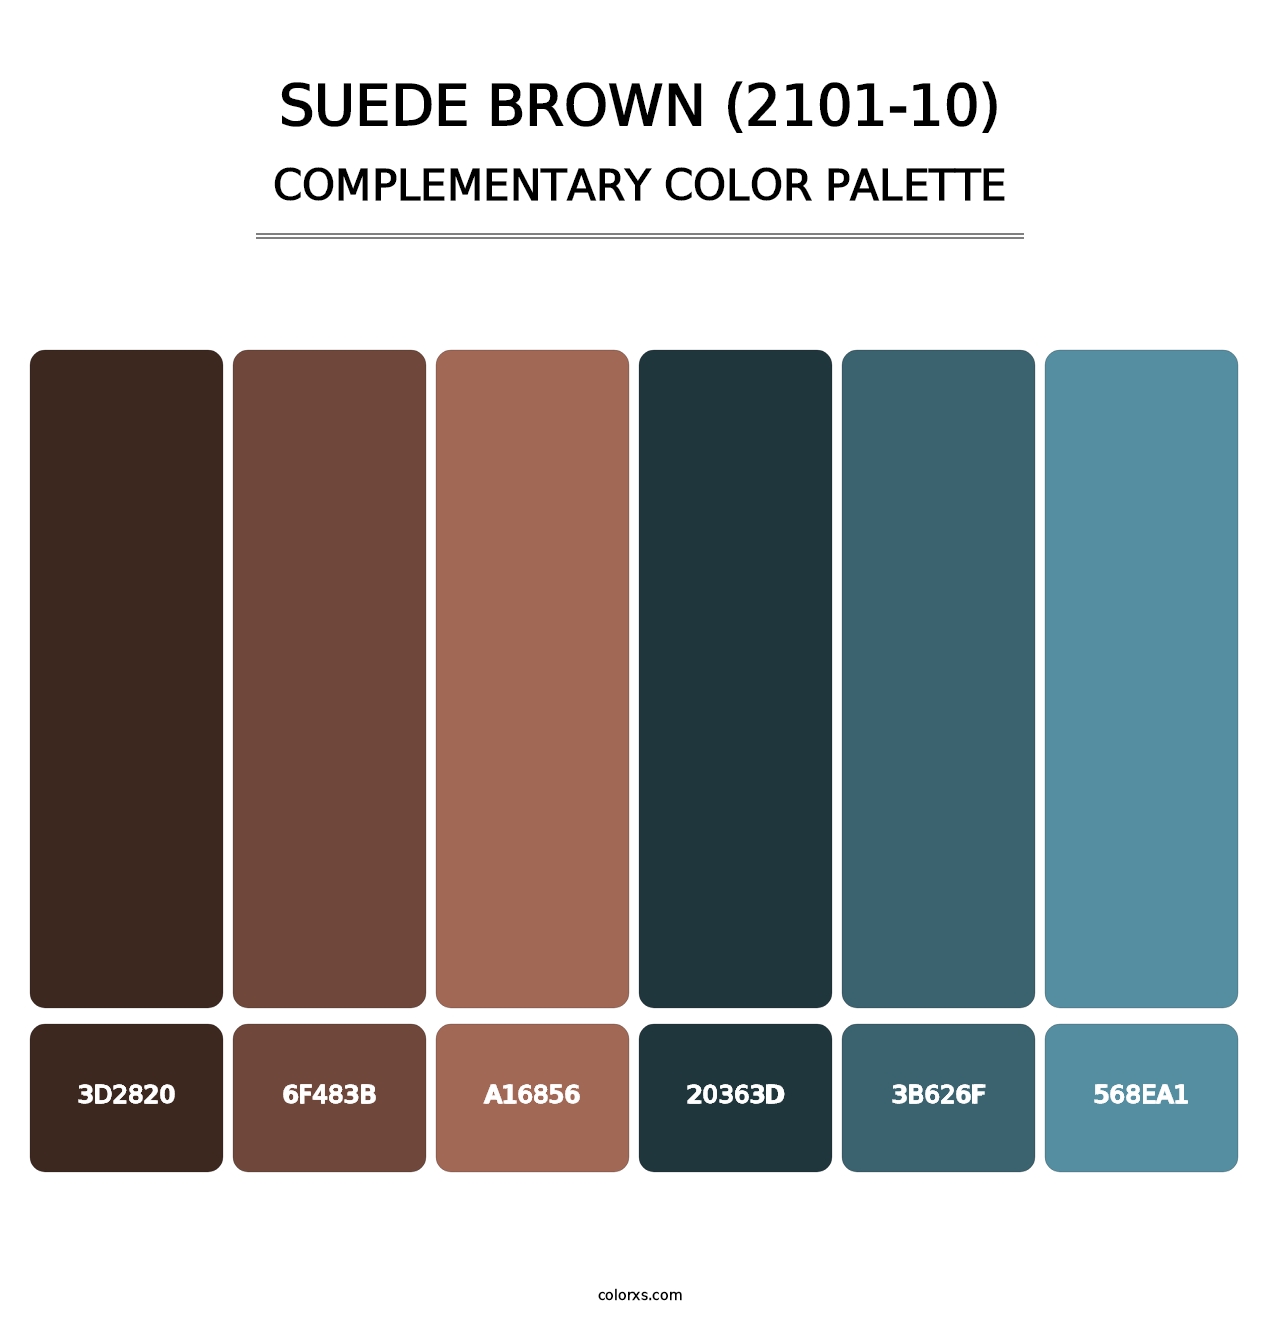 Suede Brown (2101-10) - Complementary Color Palette